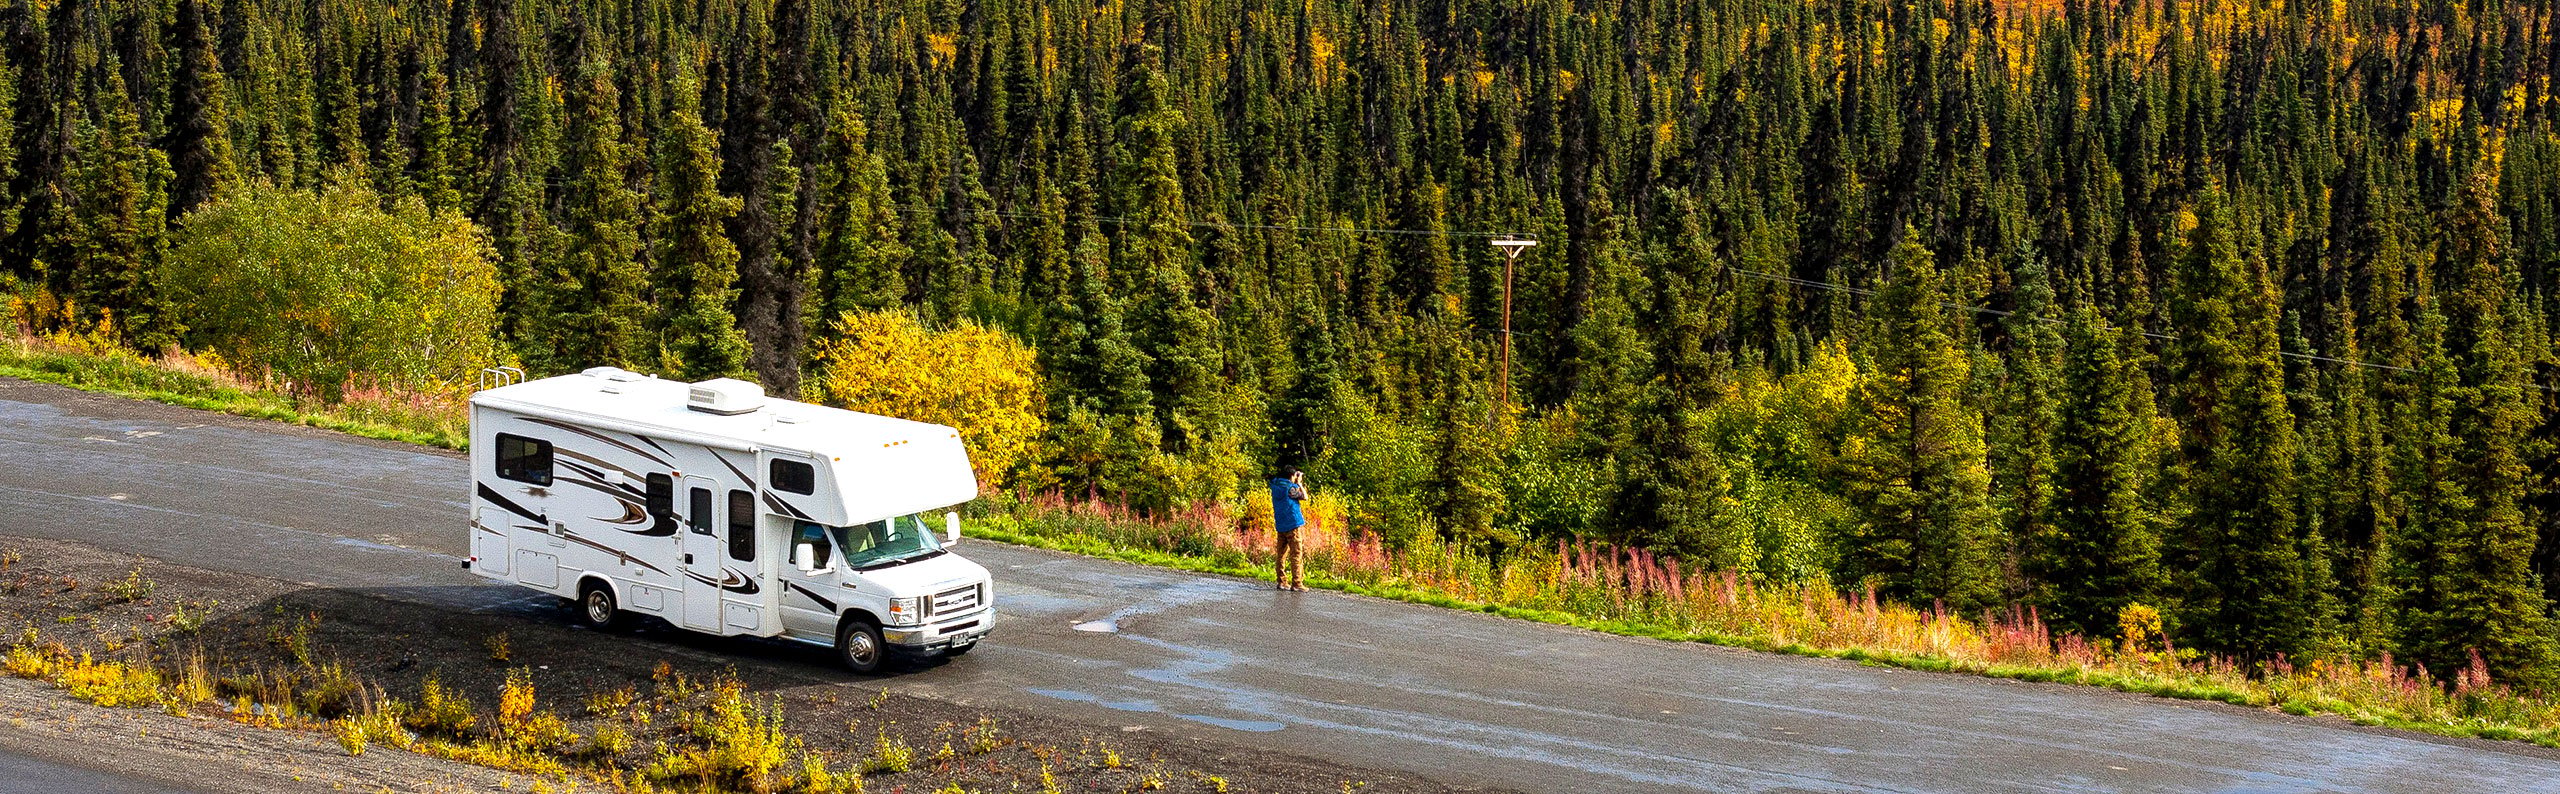 class C motorhome on road in forest